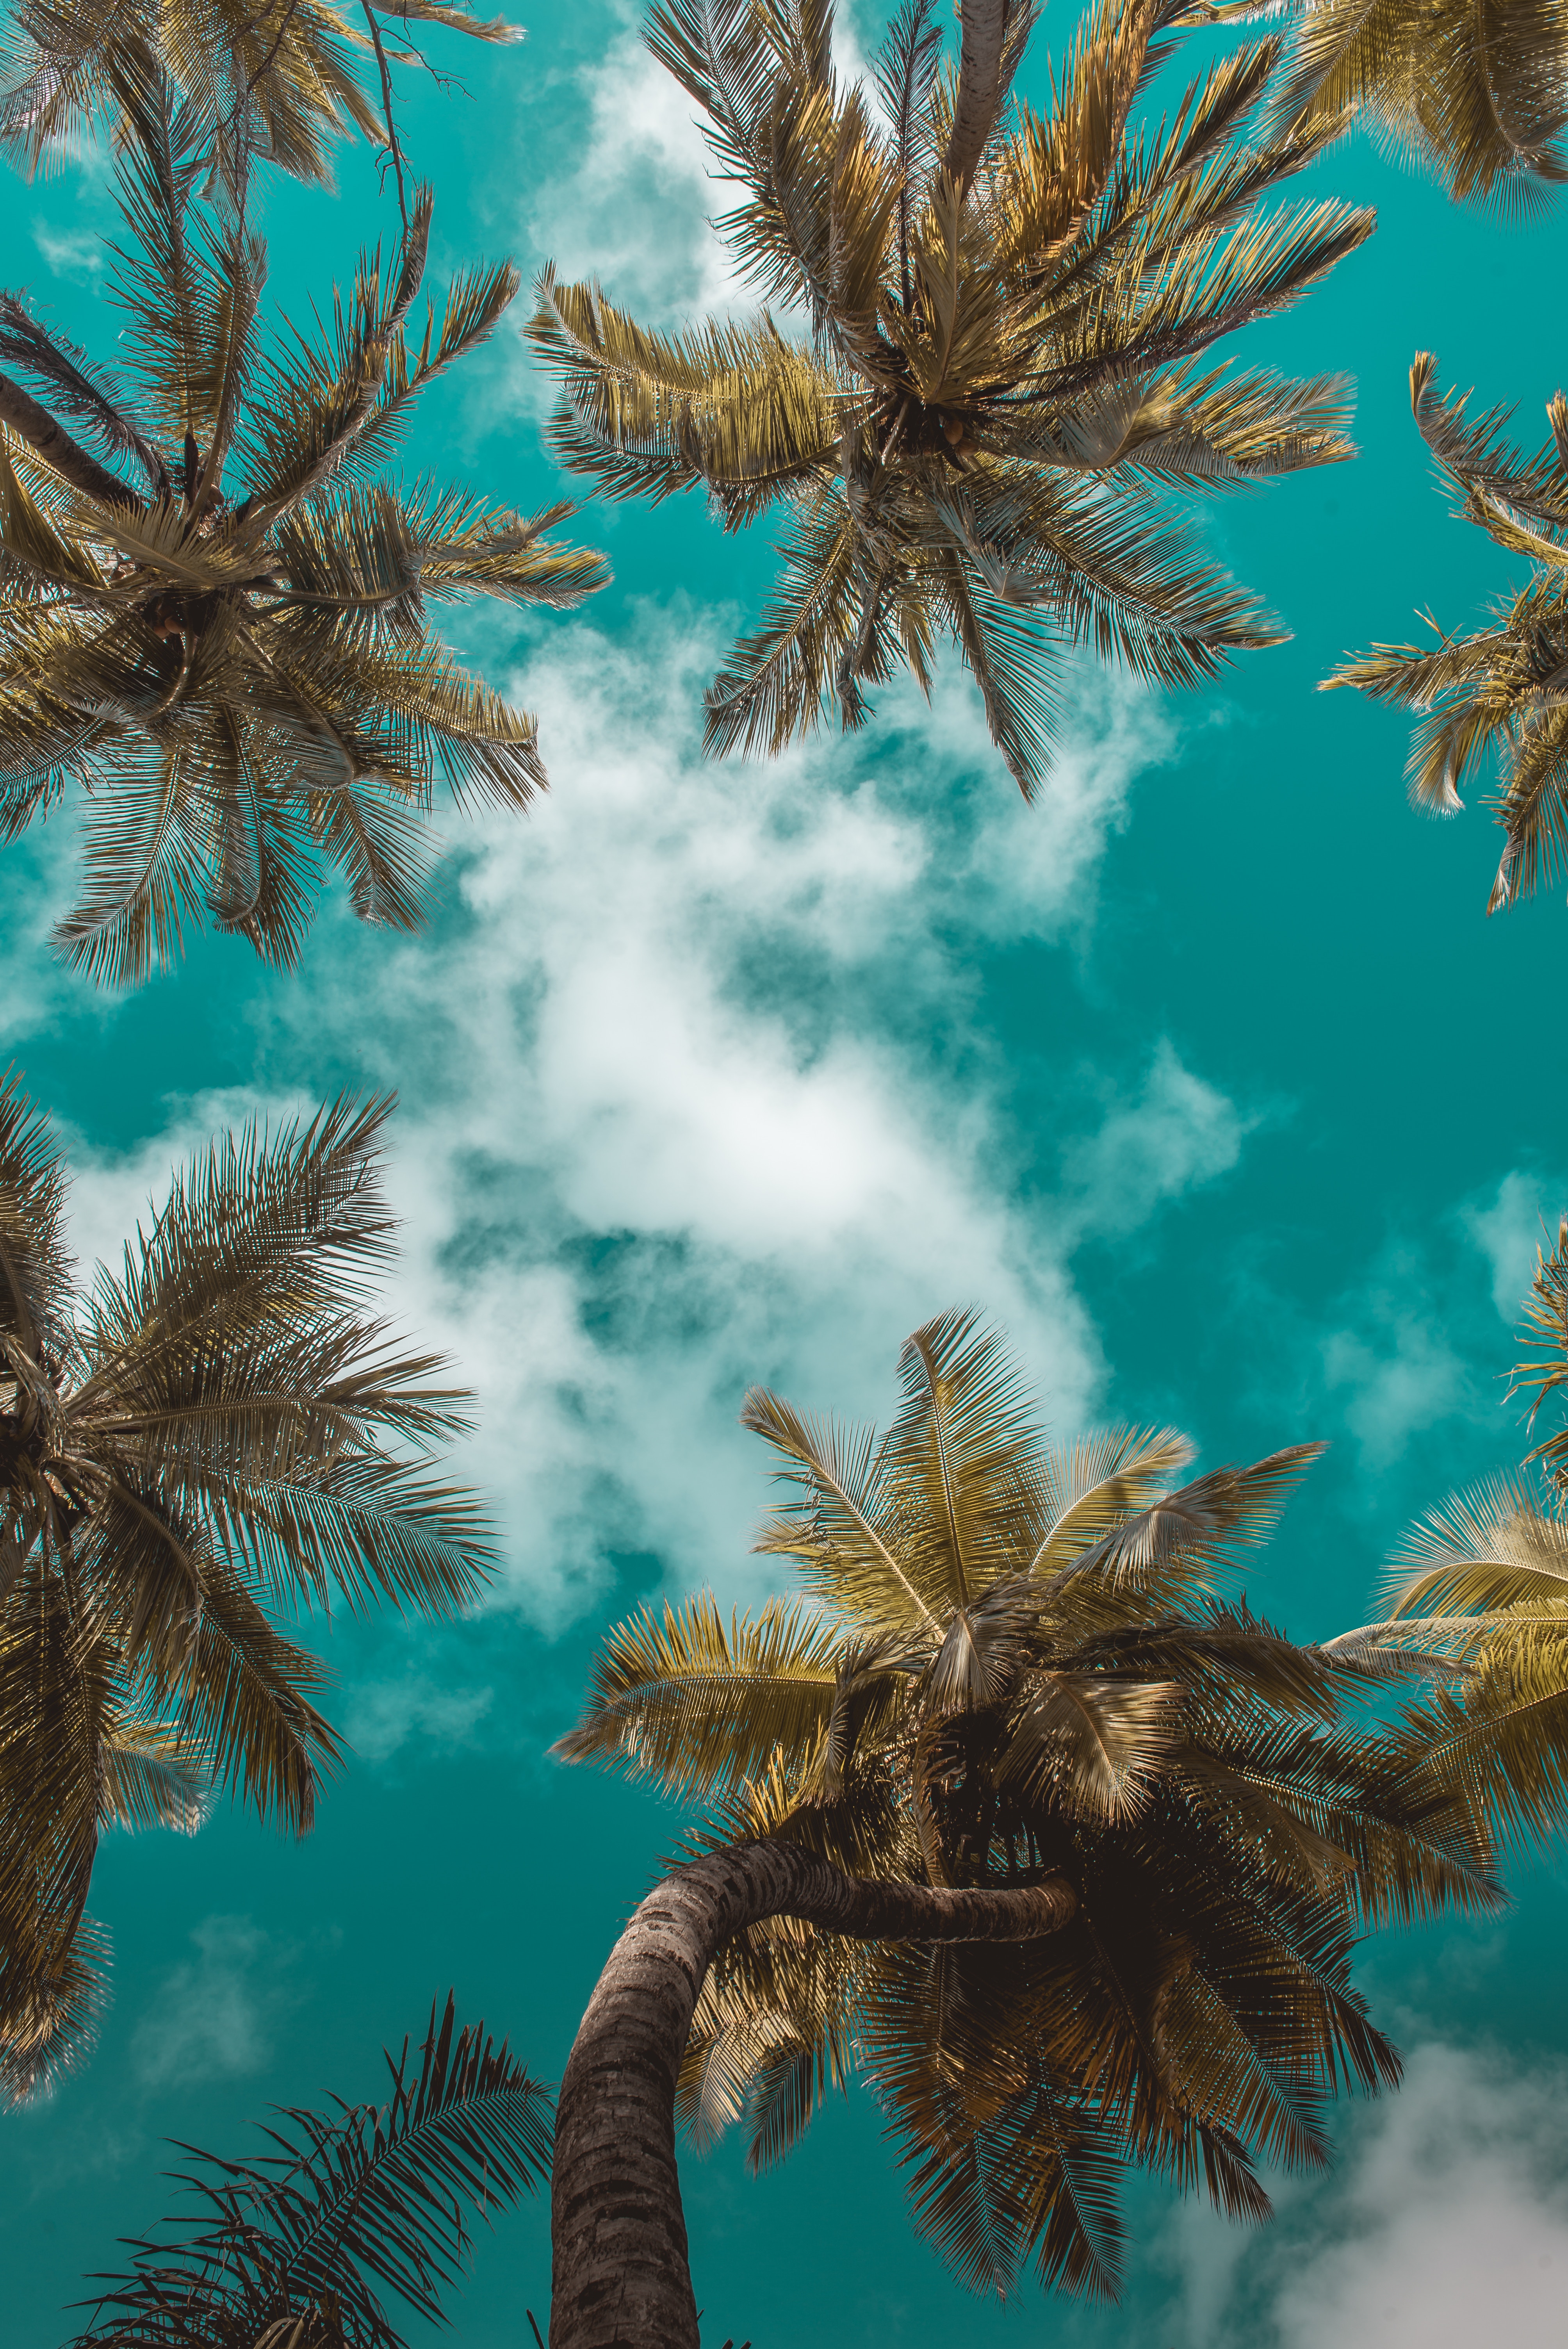 leaves, palms, nature, branches, sky, clouds, tropics, bottom view High Definition image